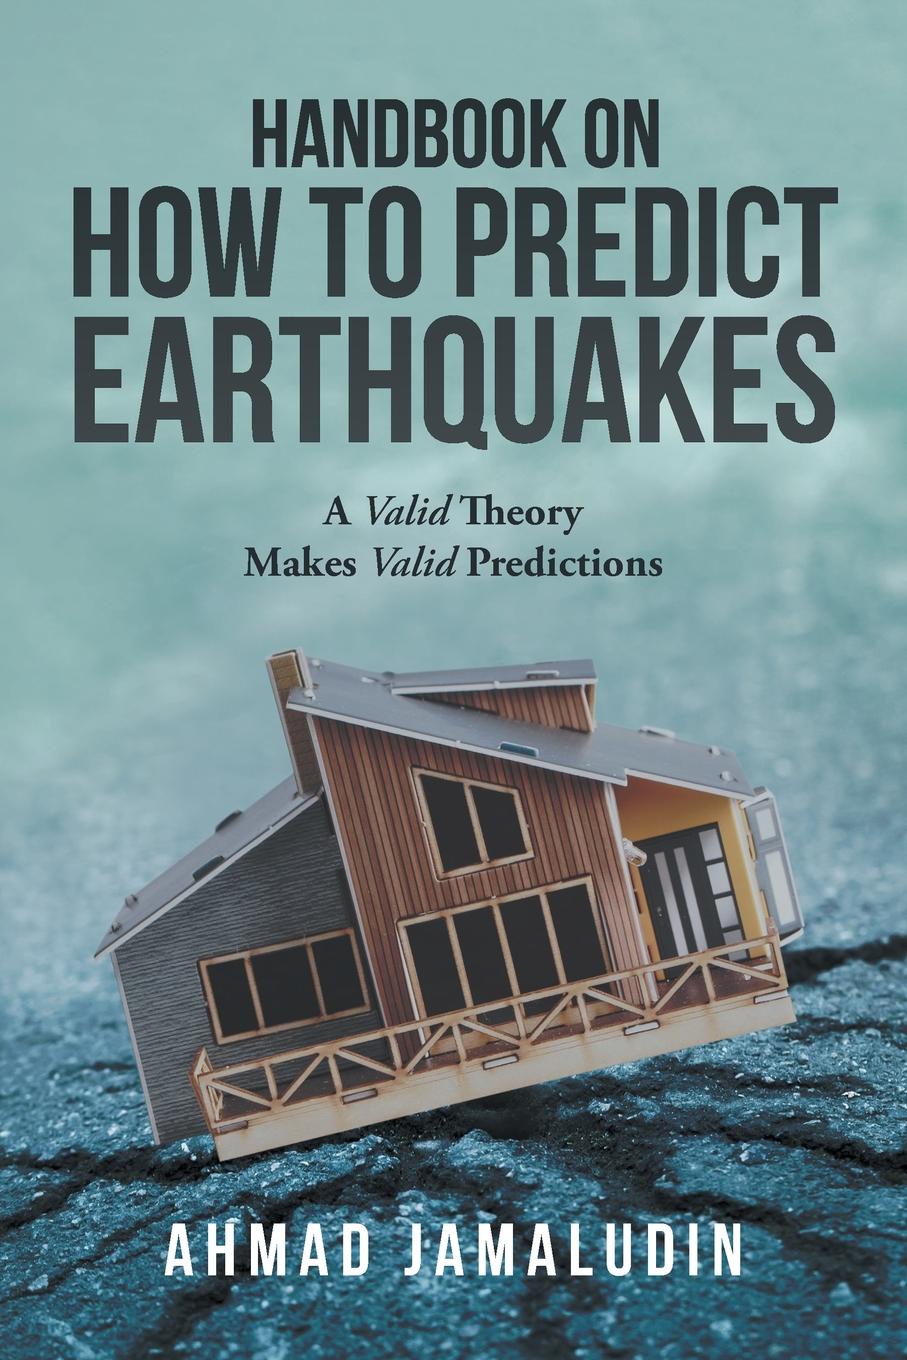 Handbook on How to Predict Earthquakes. A Valid Theory Makes Valid Predictions